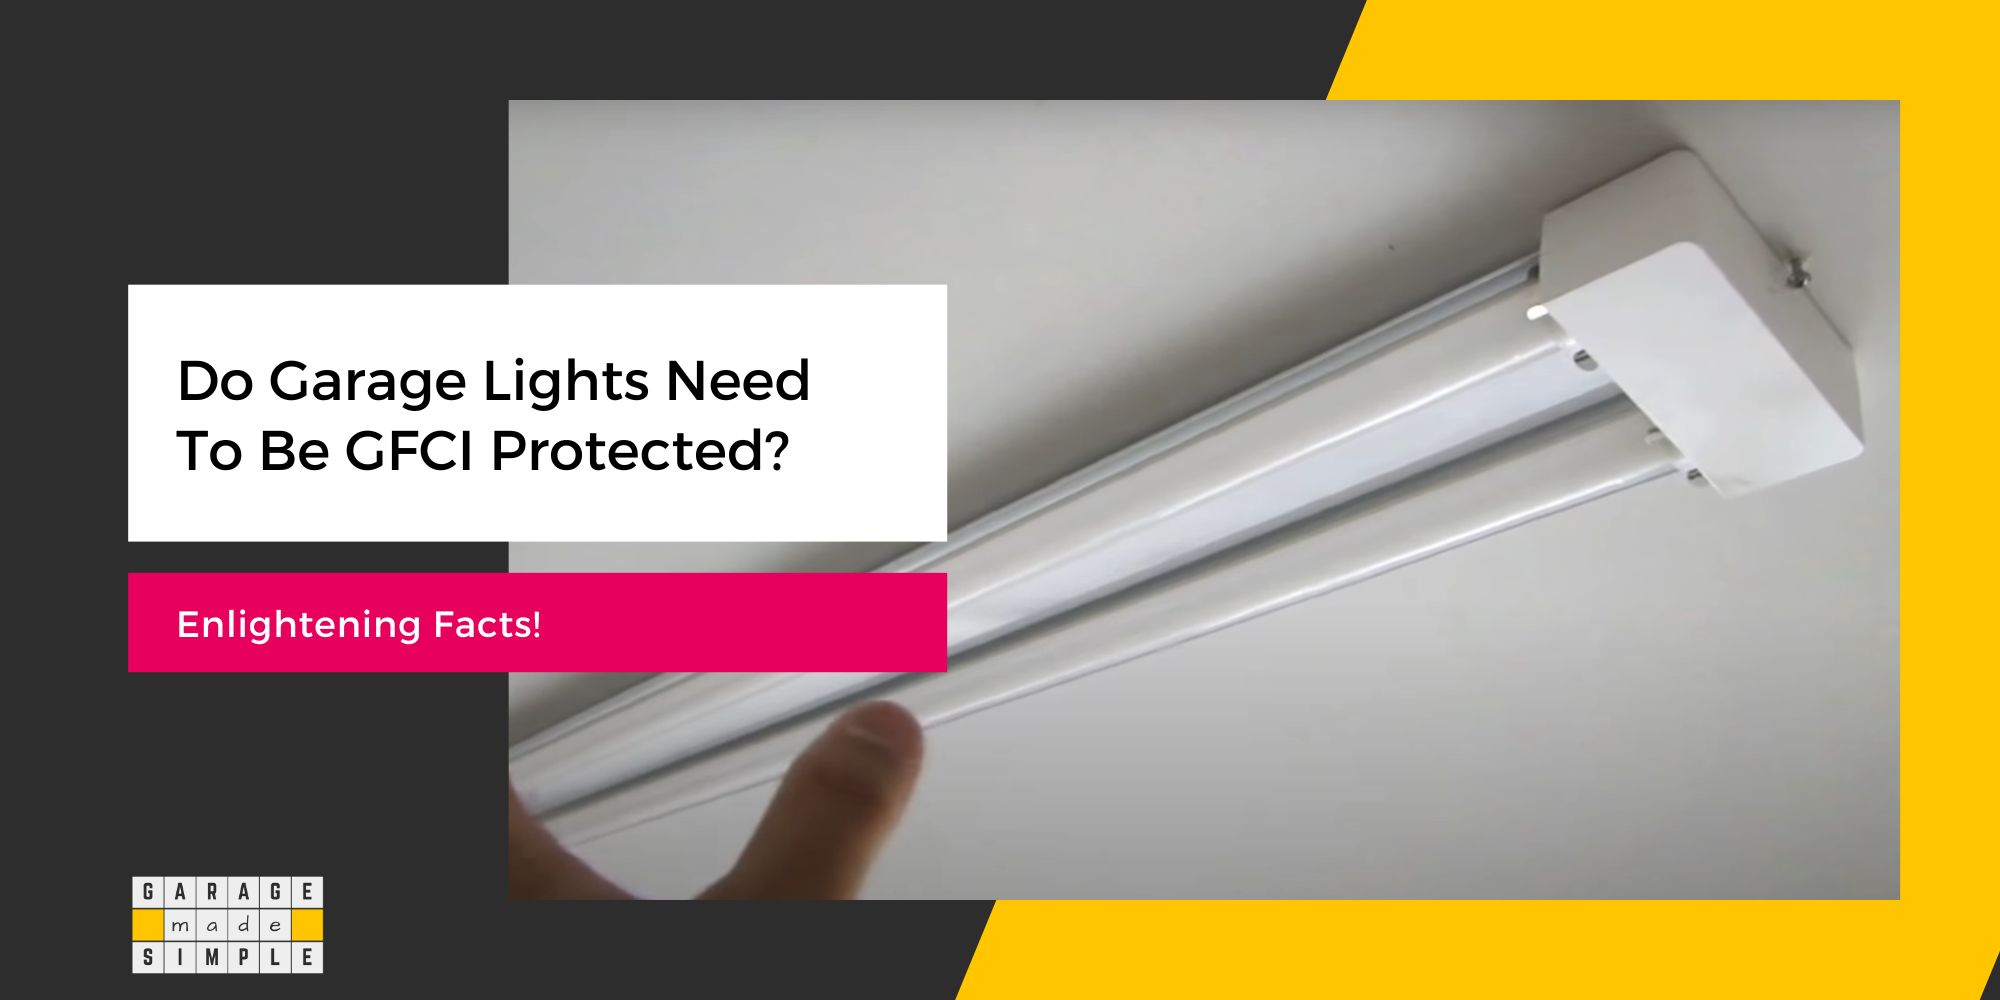 Do Garage Lights Need to Be GFCI Protected? (Enlightening Facts!)